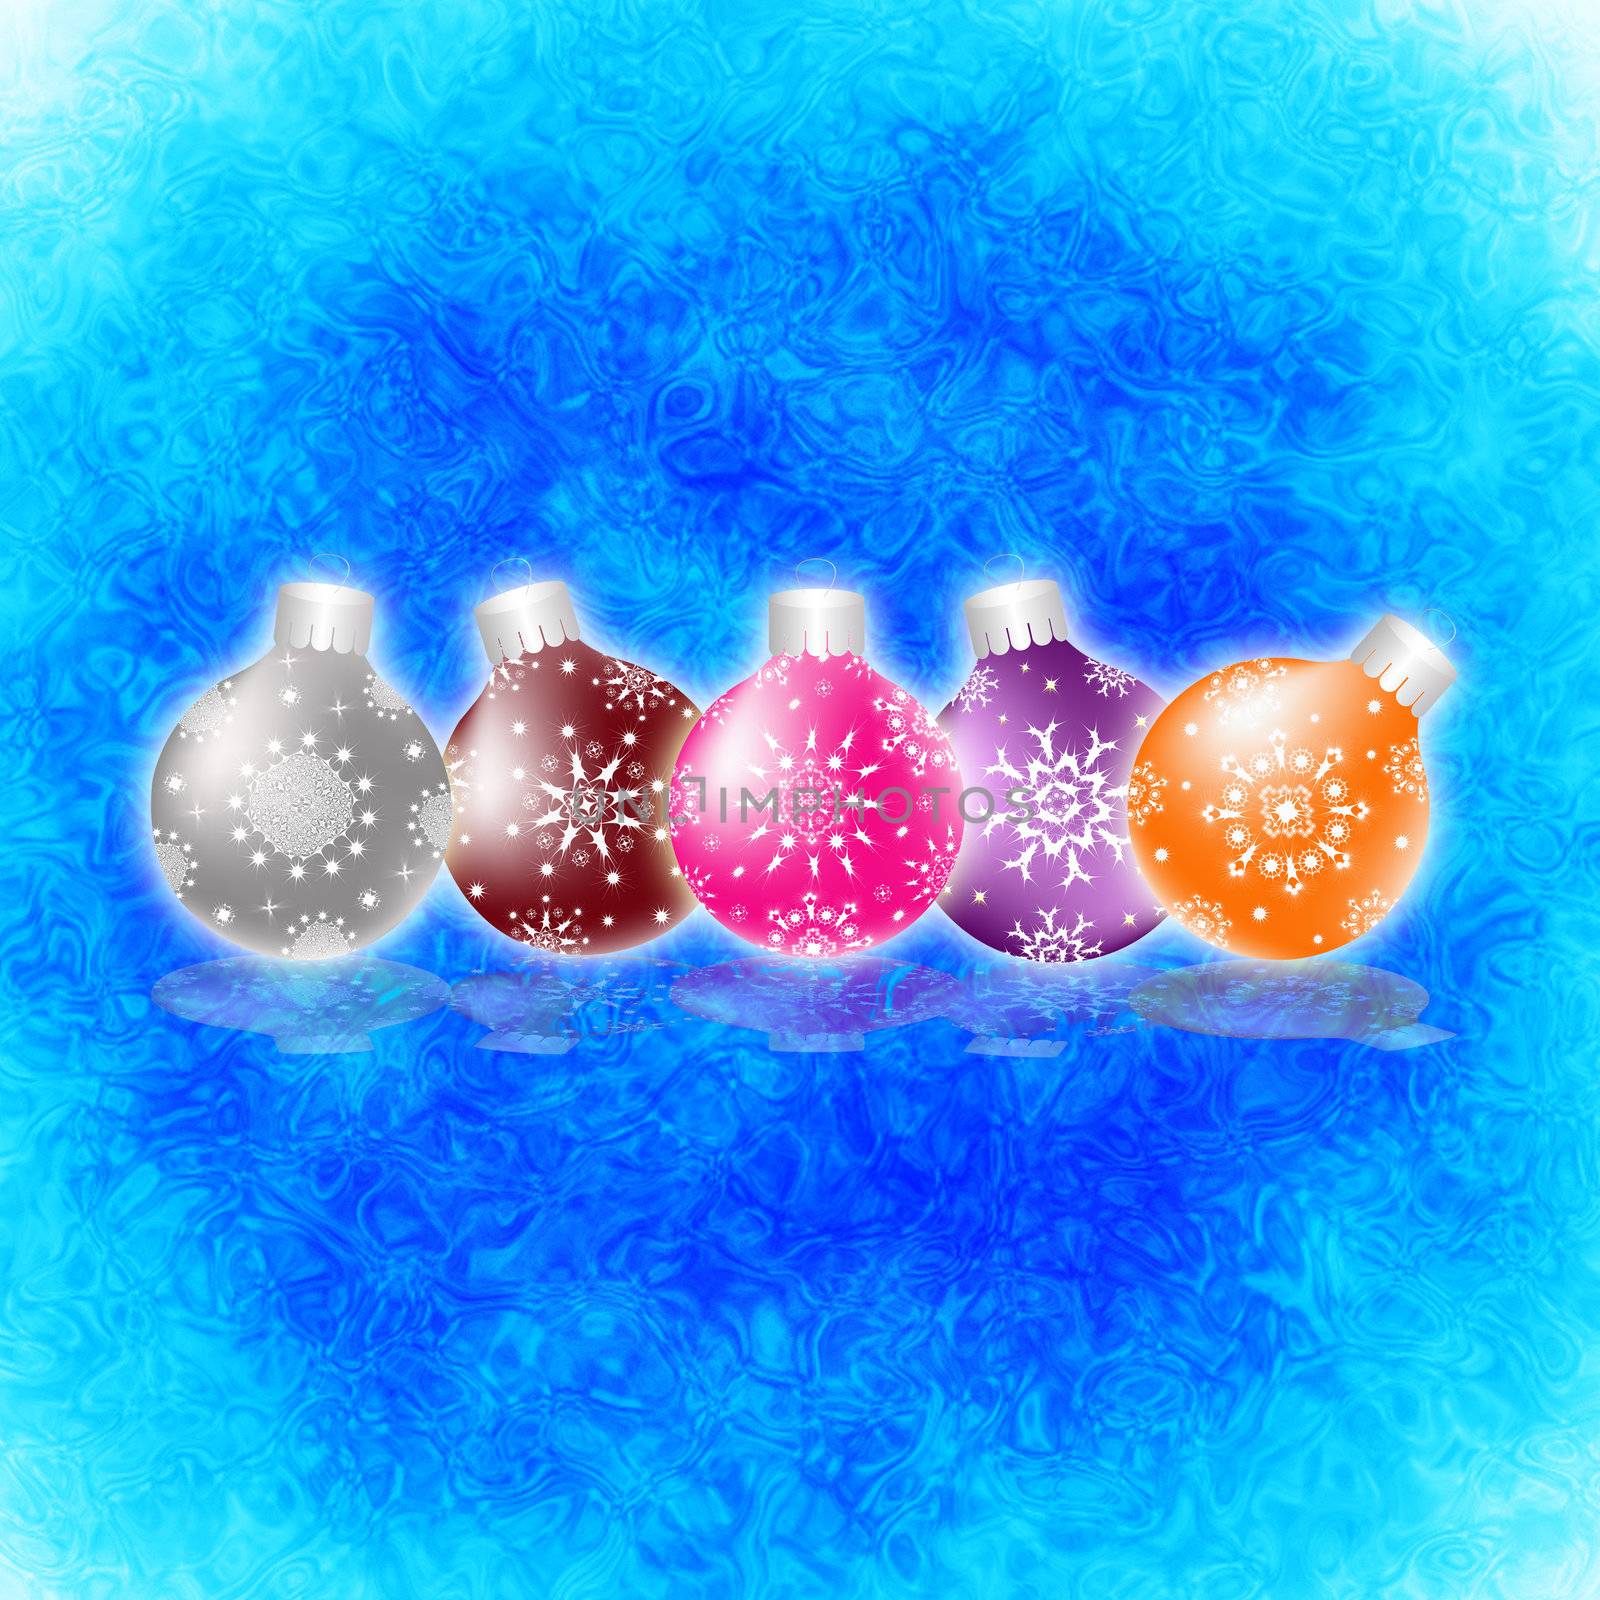 New Year's and Christmas abstract decorative elements.